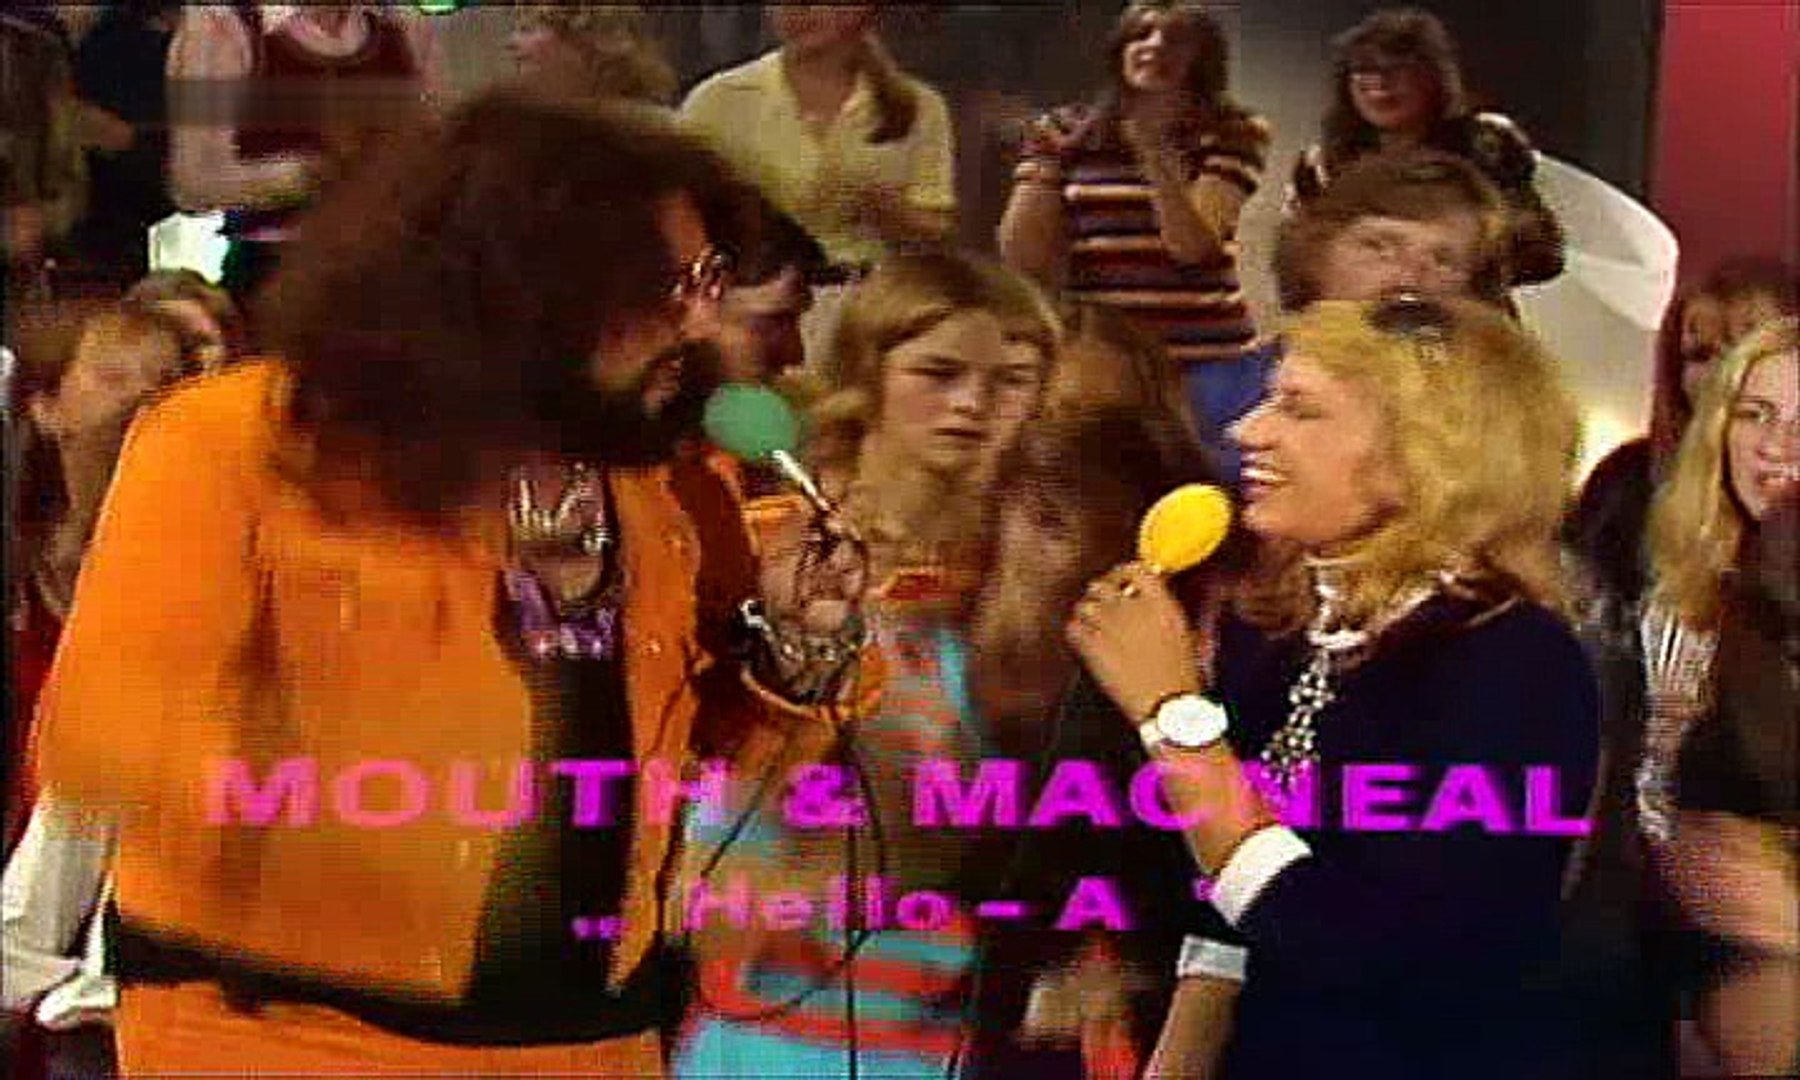 Mouth & Macneal - Hello-A 1972 - video Dailymotion